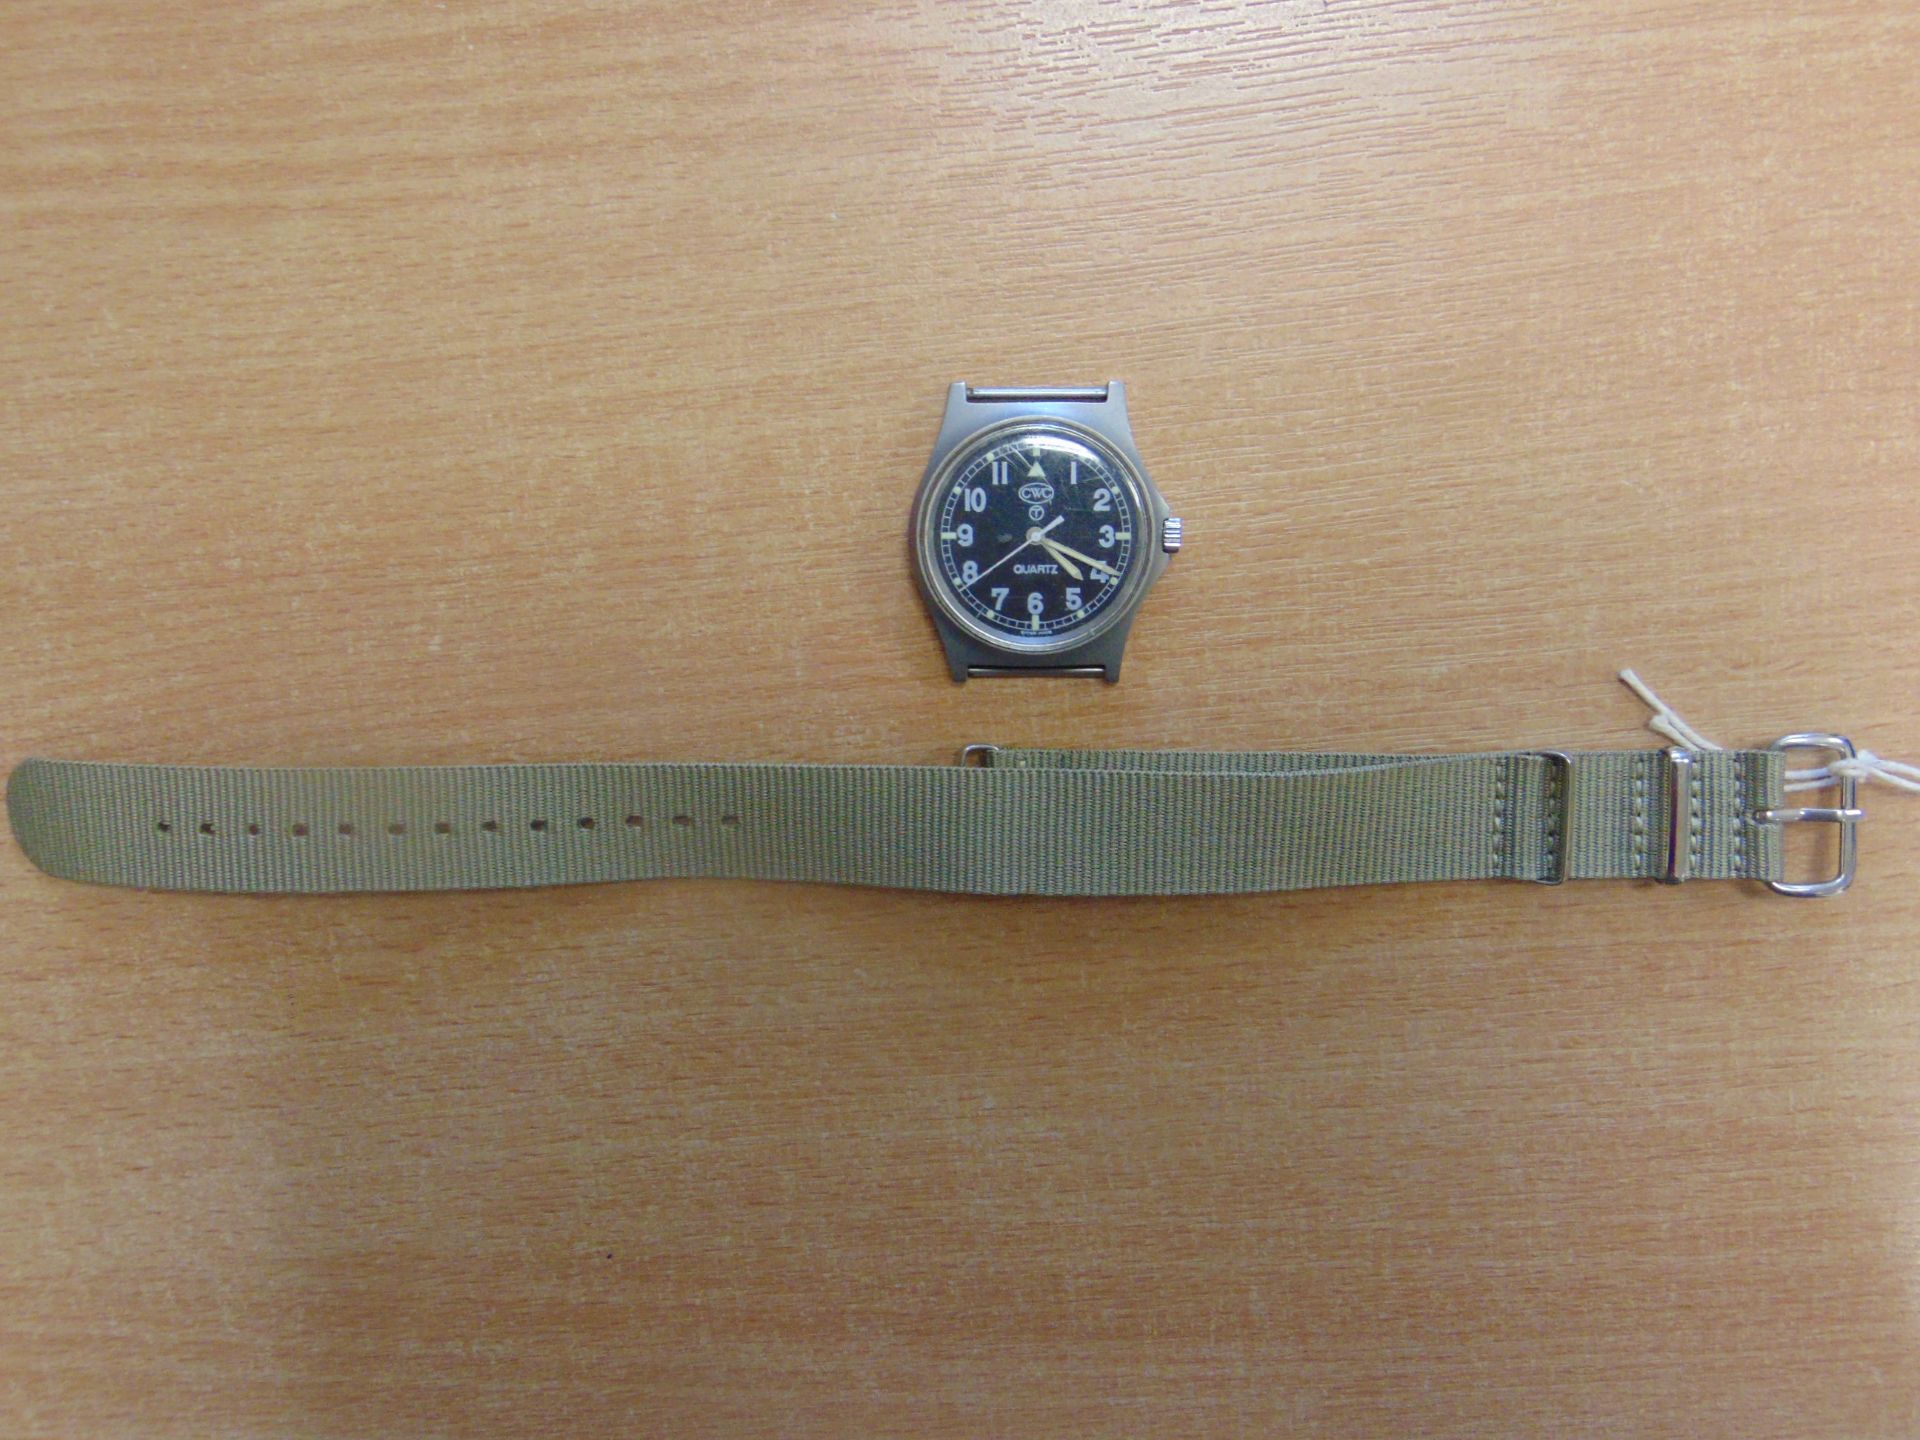 VERY RARE C.W.C 0552 RM/NAVY ISSUE SERVICE WATCH DATED 1990- GULF WAR - Image 6 of 7